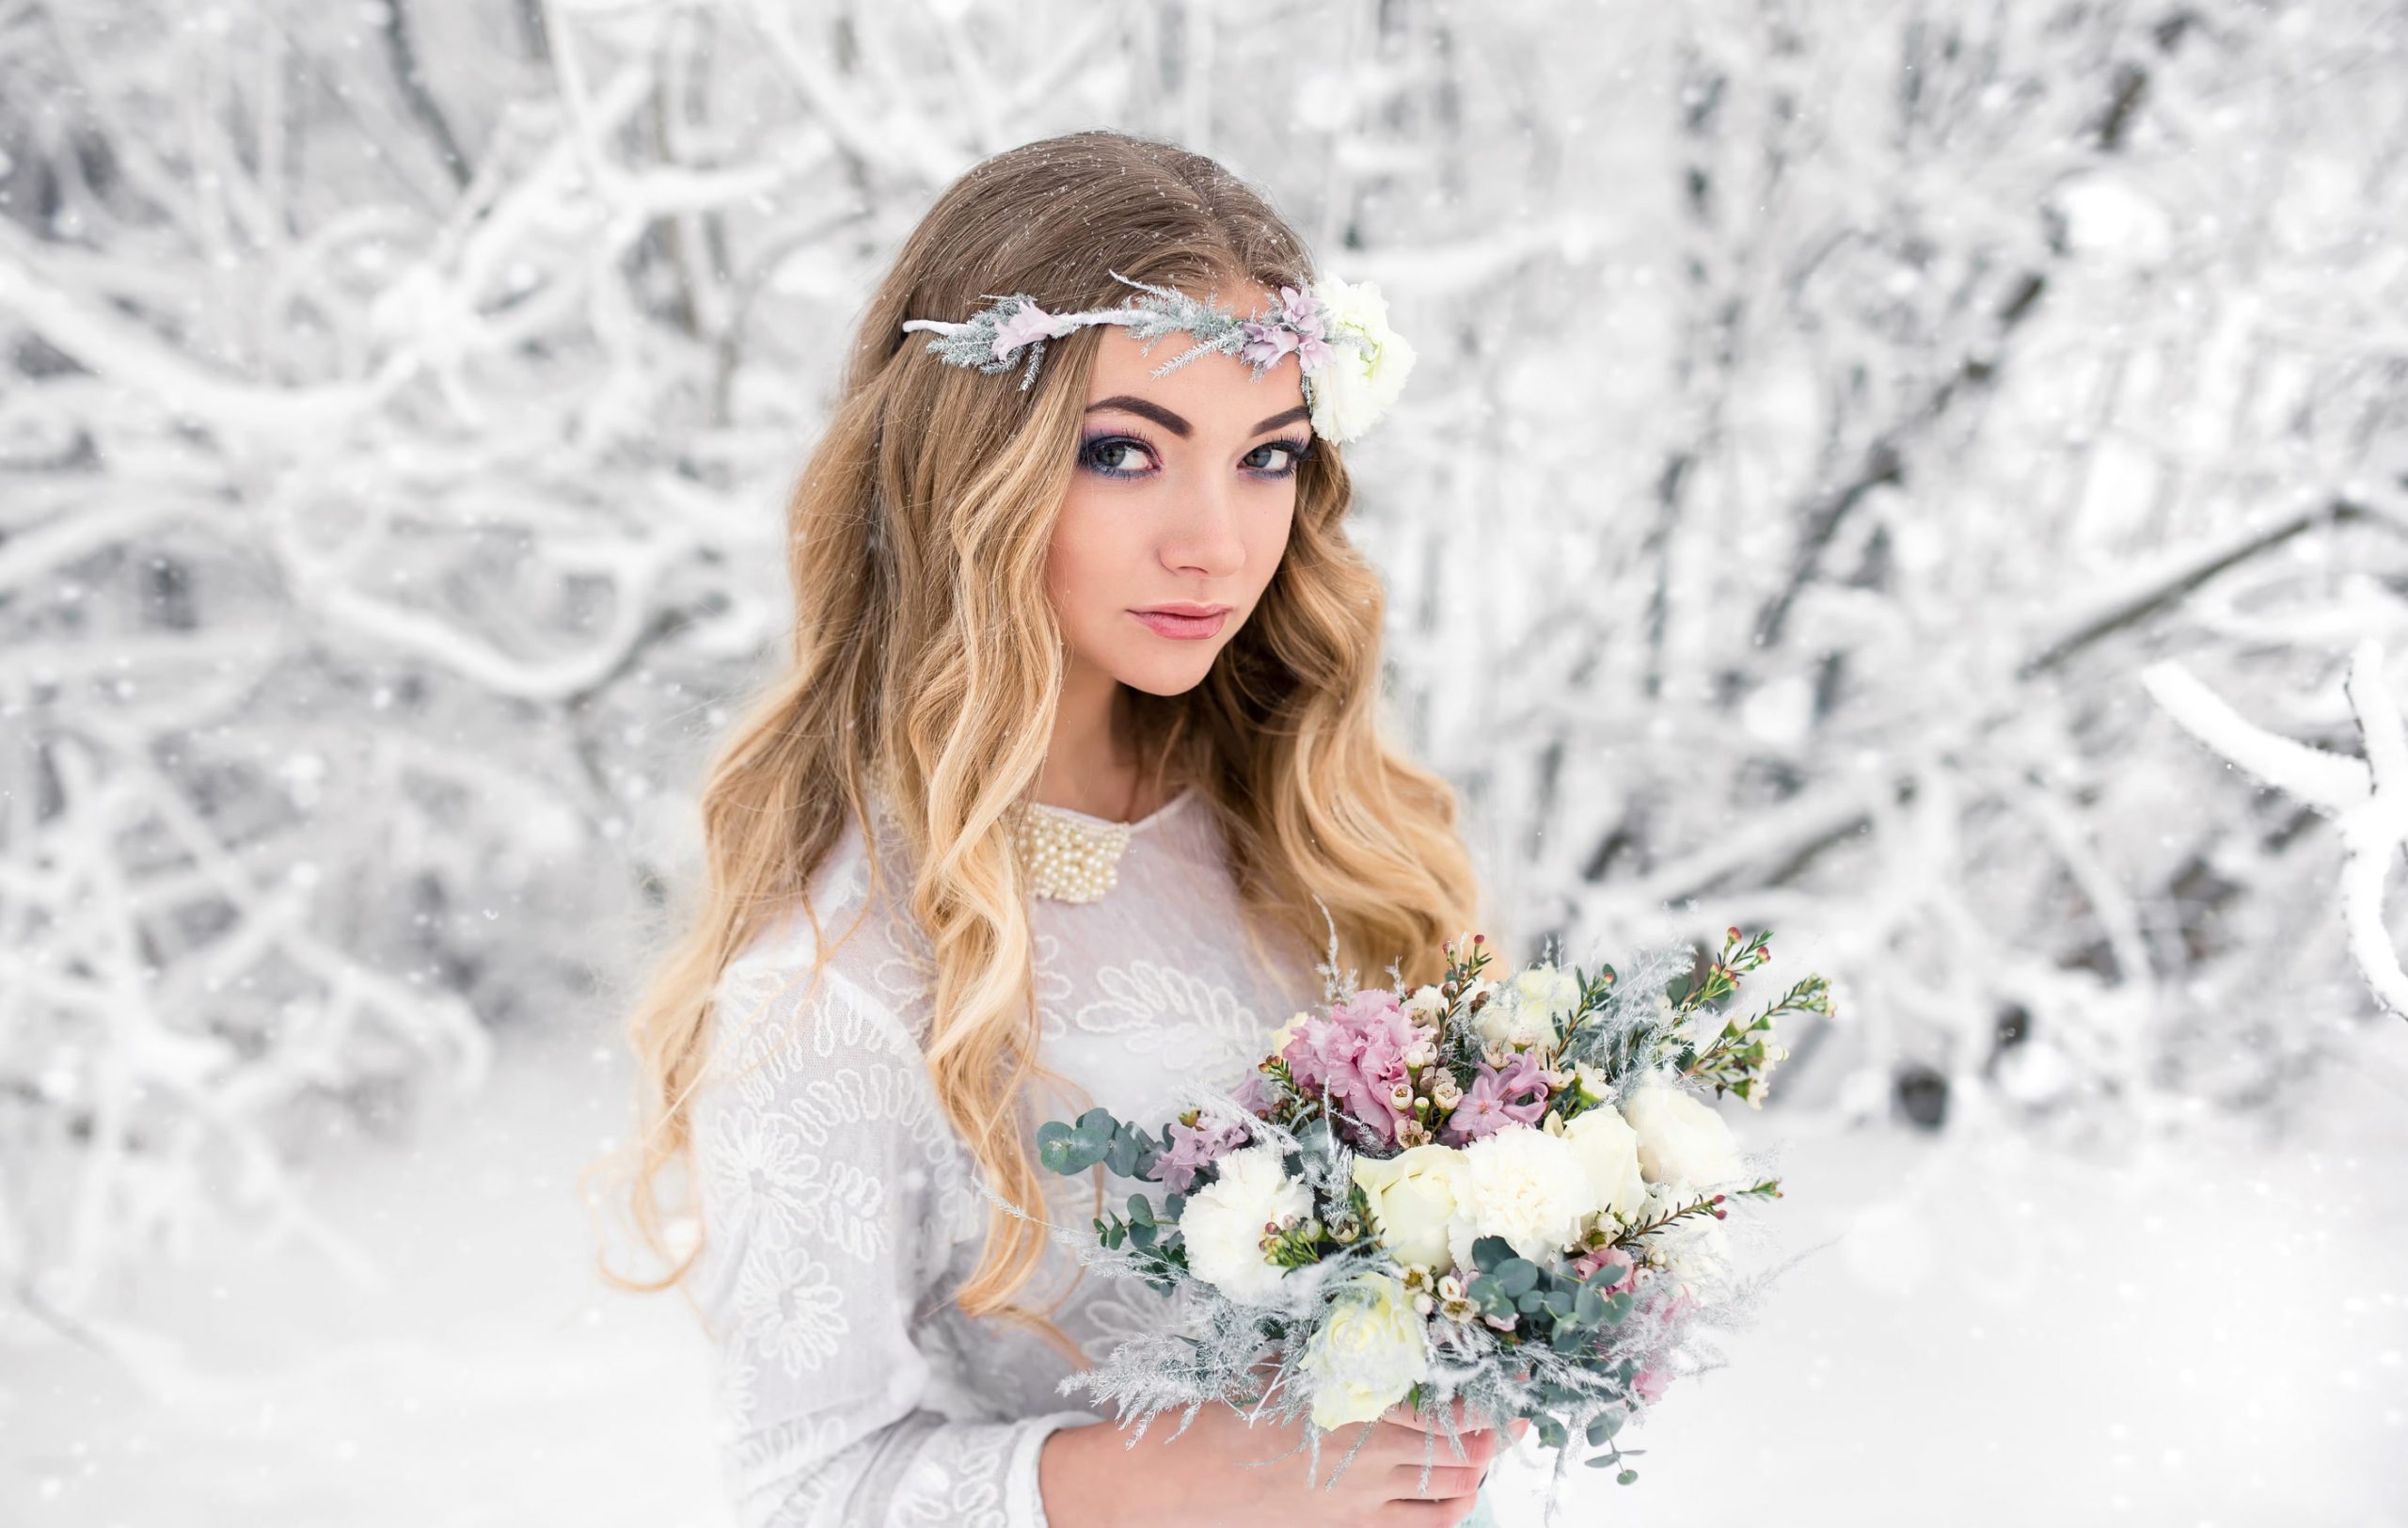 Winter Wedding Makeup Tips For The